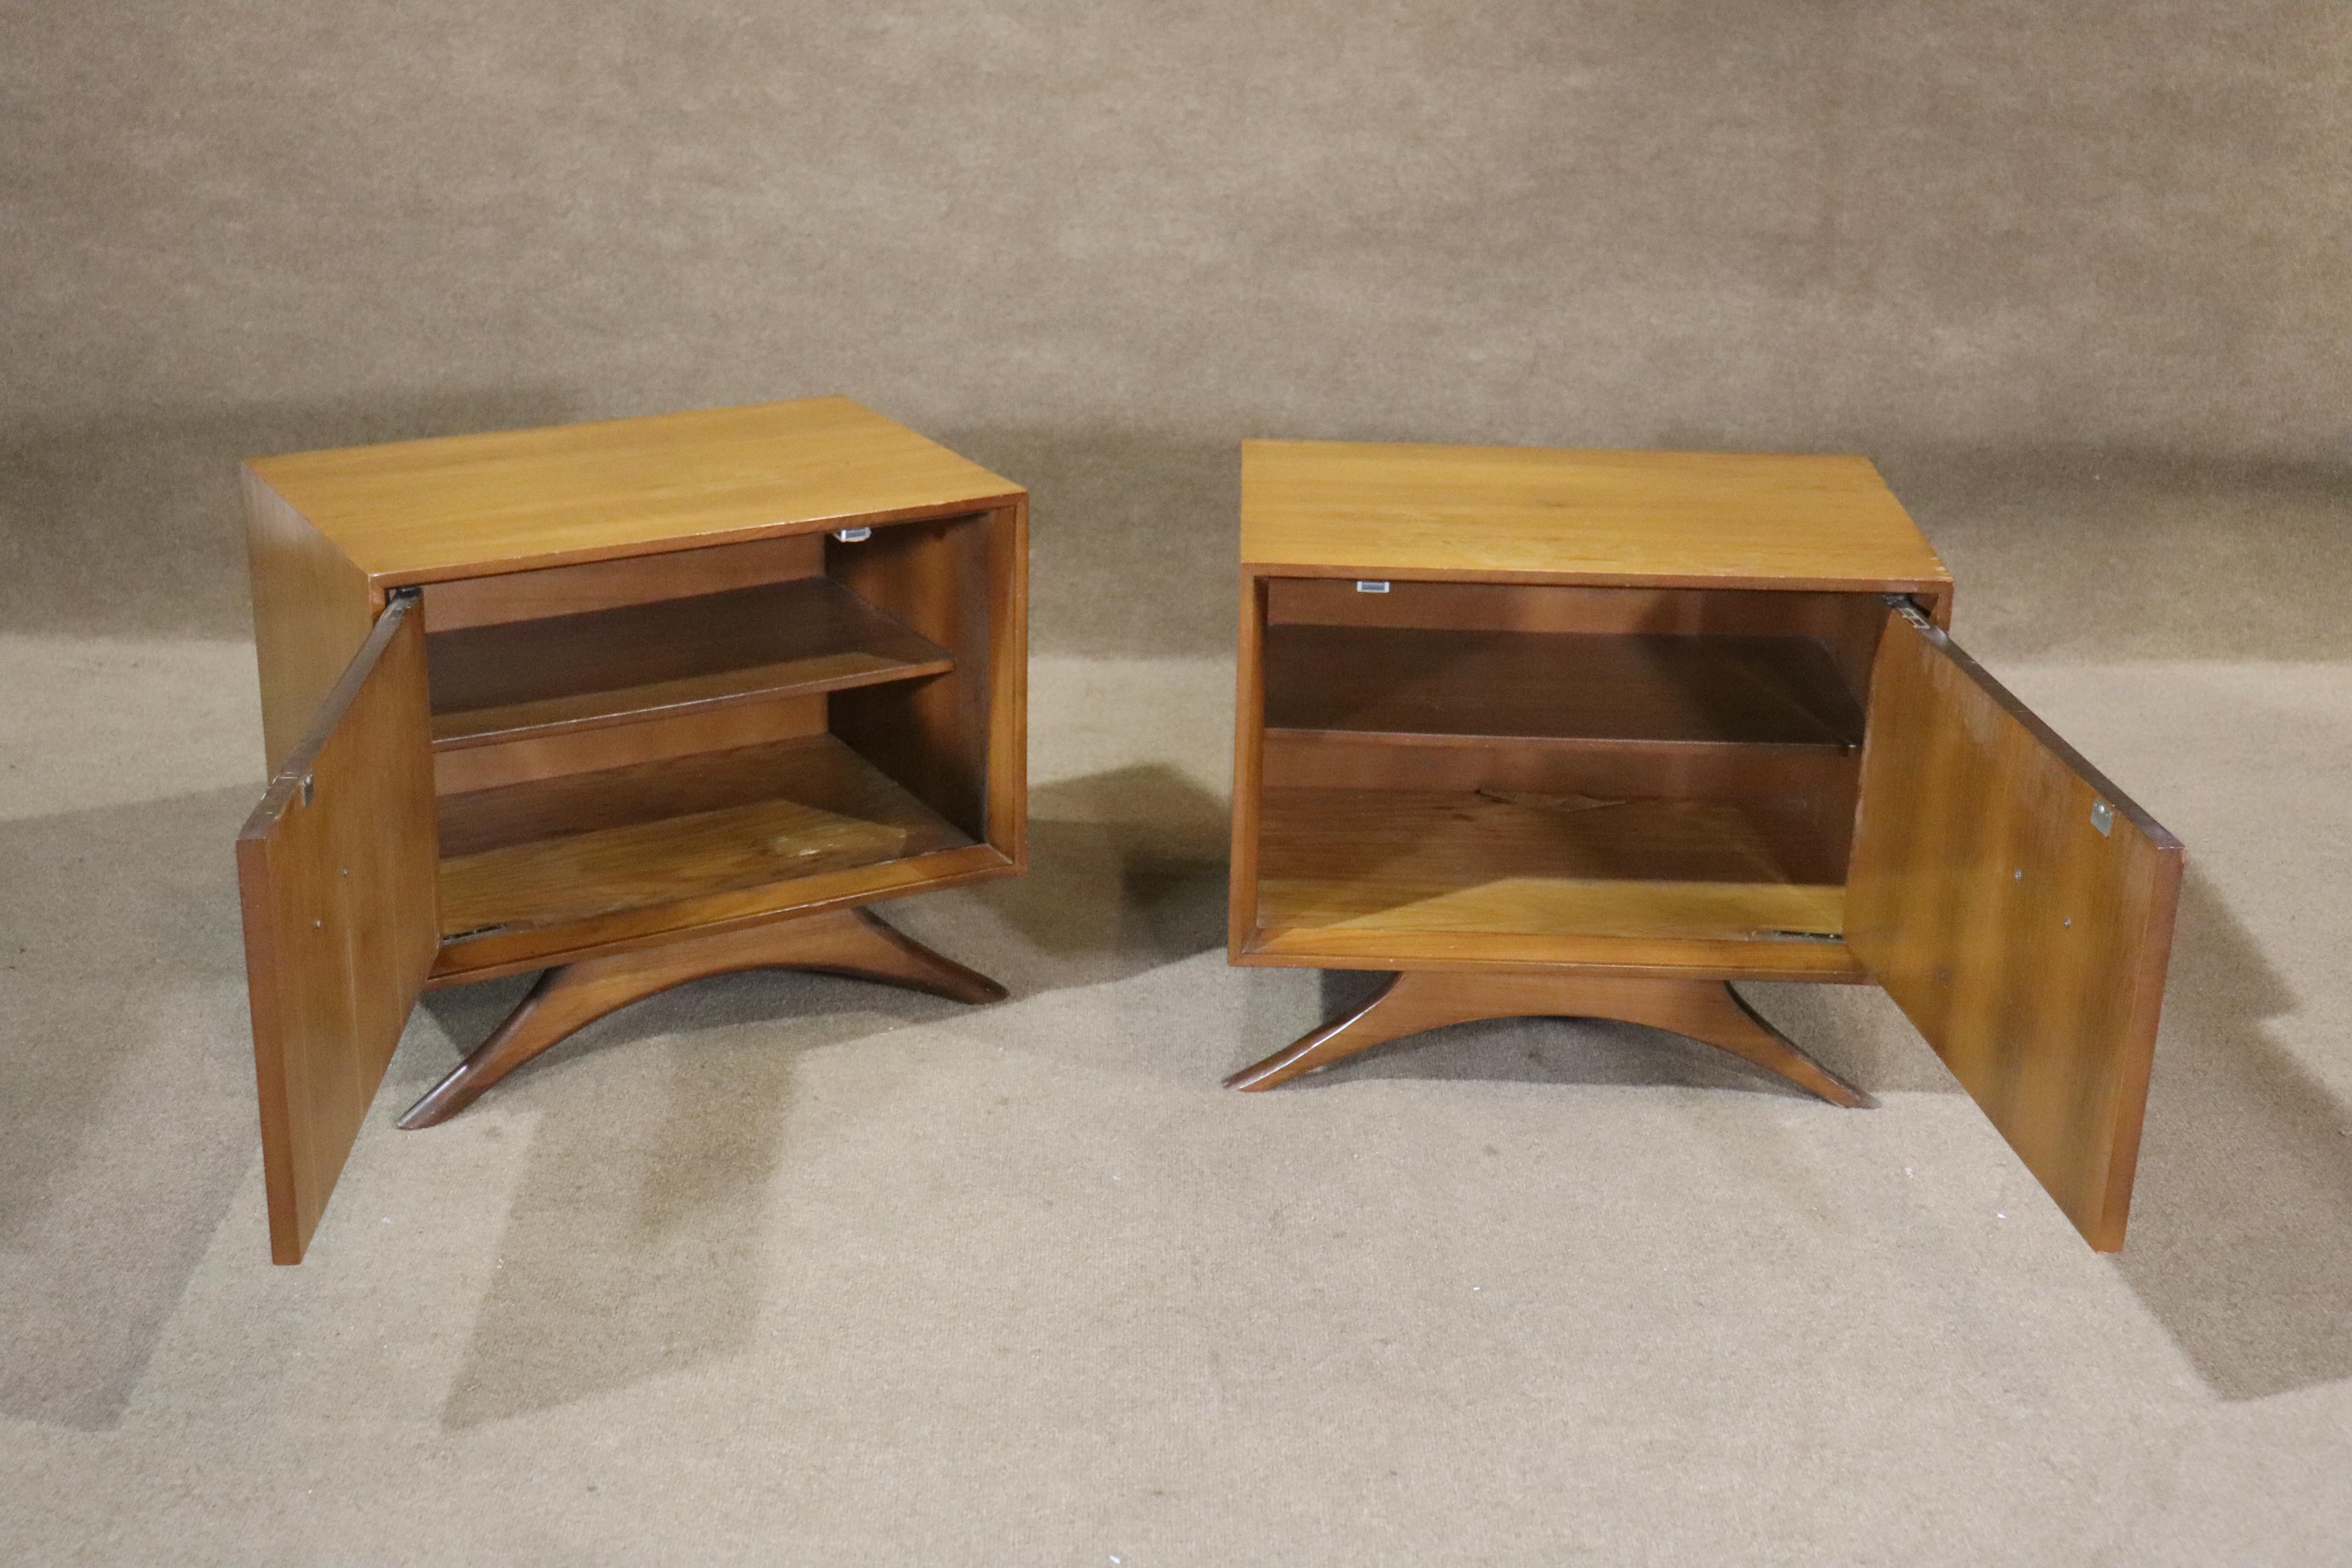 This outstanding pair of nightstands are influenced by Vladimir Kagan's sculpted furniture esthetic. Walnut frames on dramatic wood bases. Great for living or bedroom storage.
Please confirm location NY or NJ